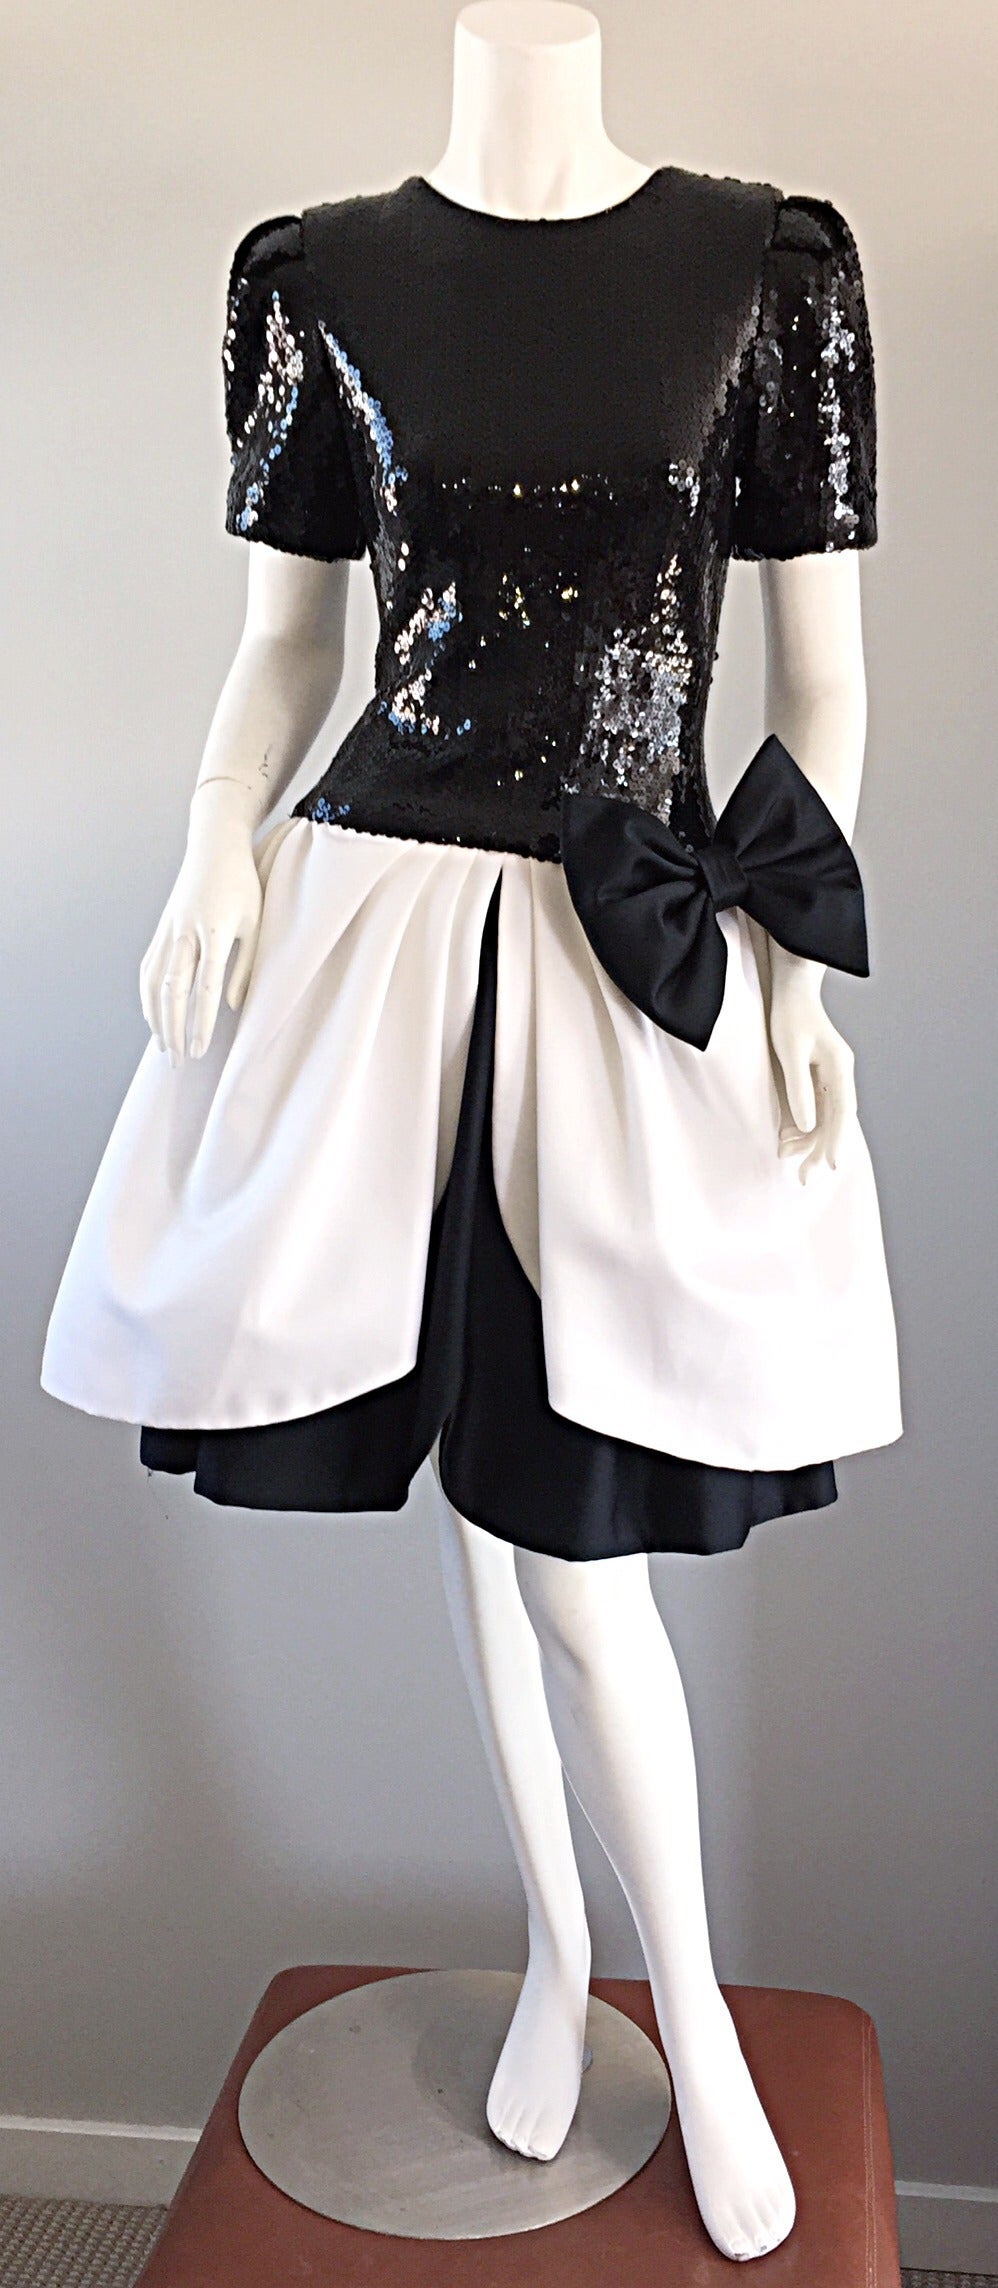 Incredible vintage black and white dress! Bodice is fully encrusted with sequins. Wonderful pouf skirt, with a chic silk bow on the side. Wonderful fit, that looks absolutely sensational on! Fully lined. Very well made. Hidden zipper up the back.